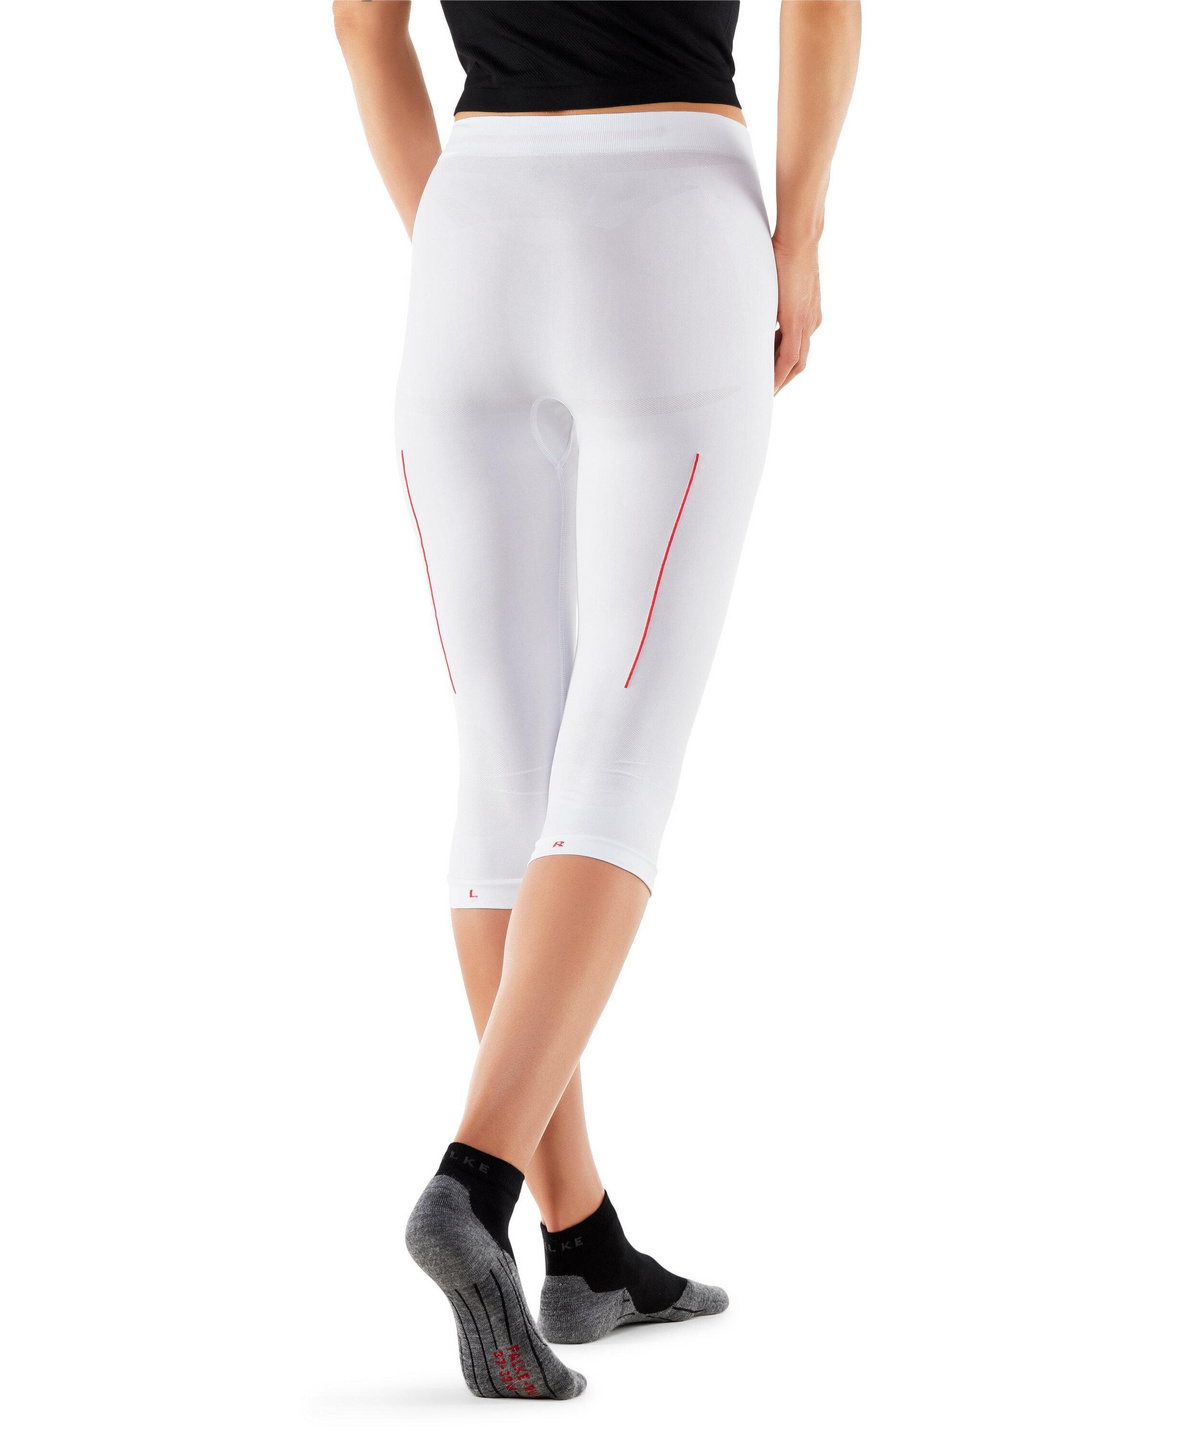 White FALKE Womens Tight Fit Long Tights